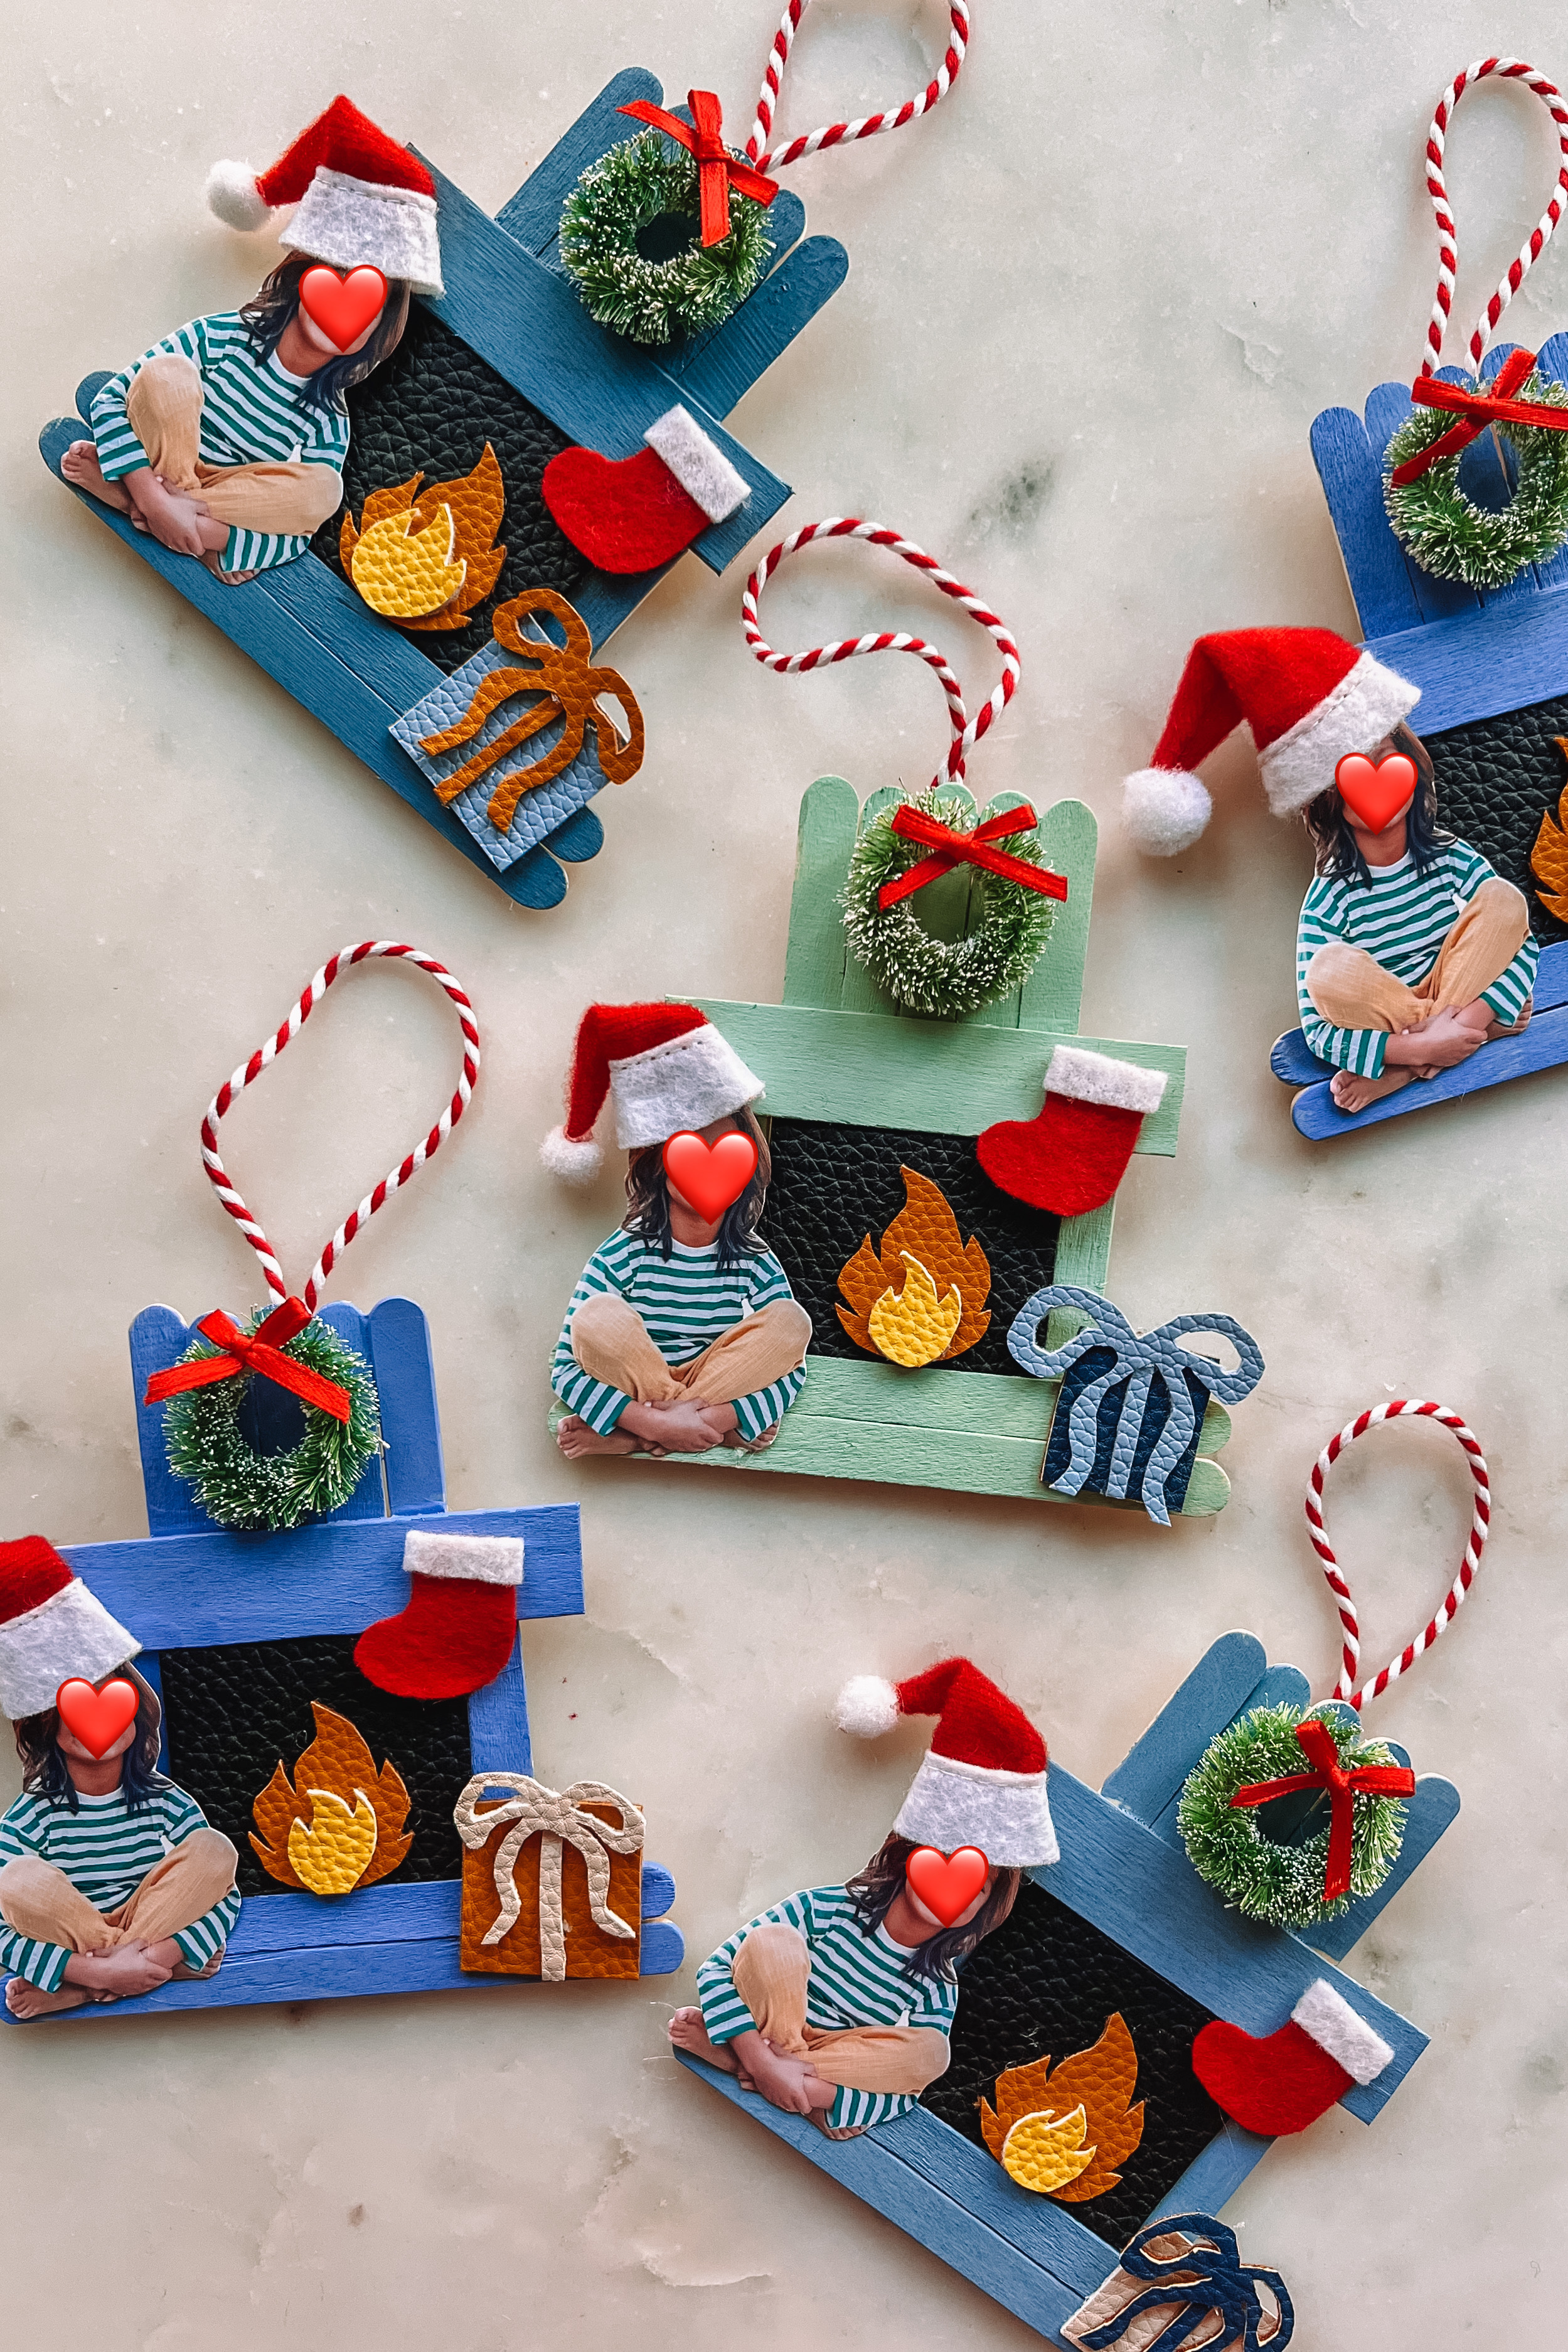 DIY Christmas Crafts with Popsicle Sticks